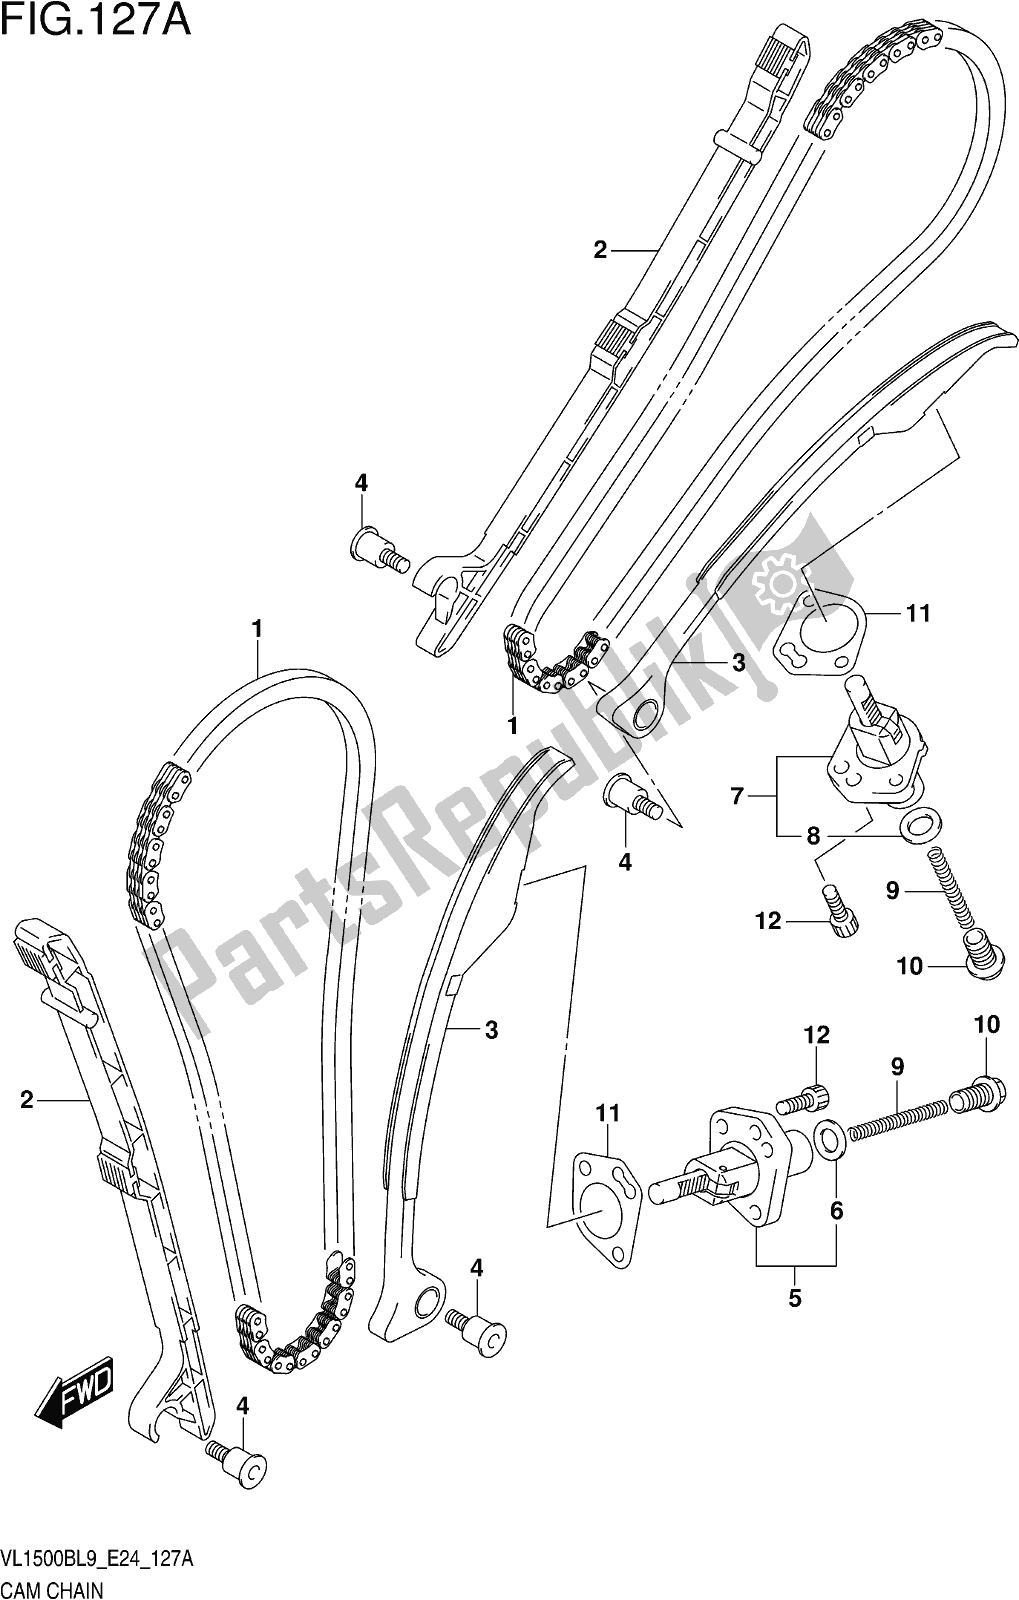 All parts for the Fig. 127a Cam Chain of the Suzuki VL 1500B 2019